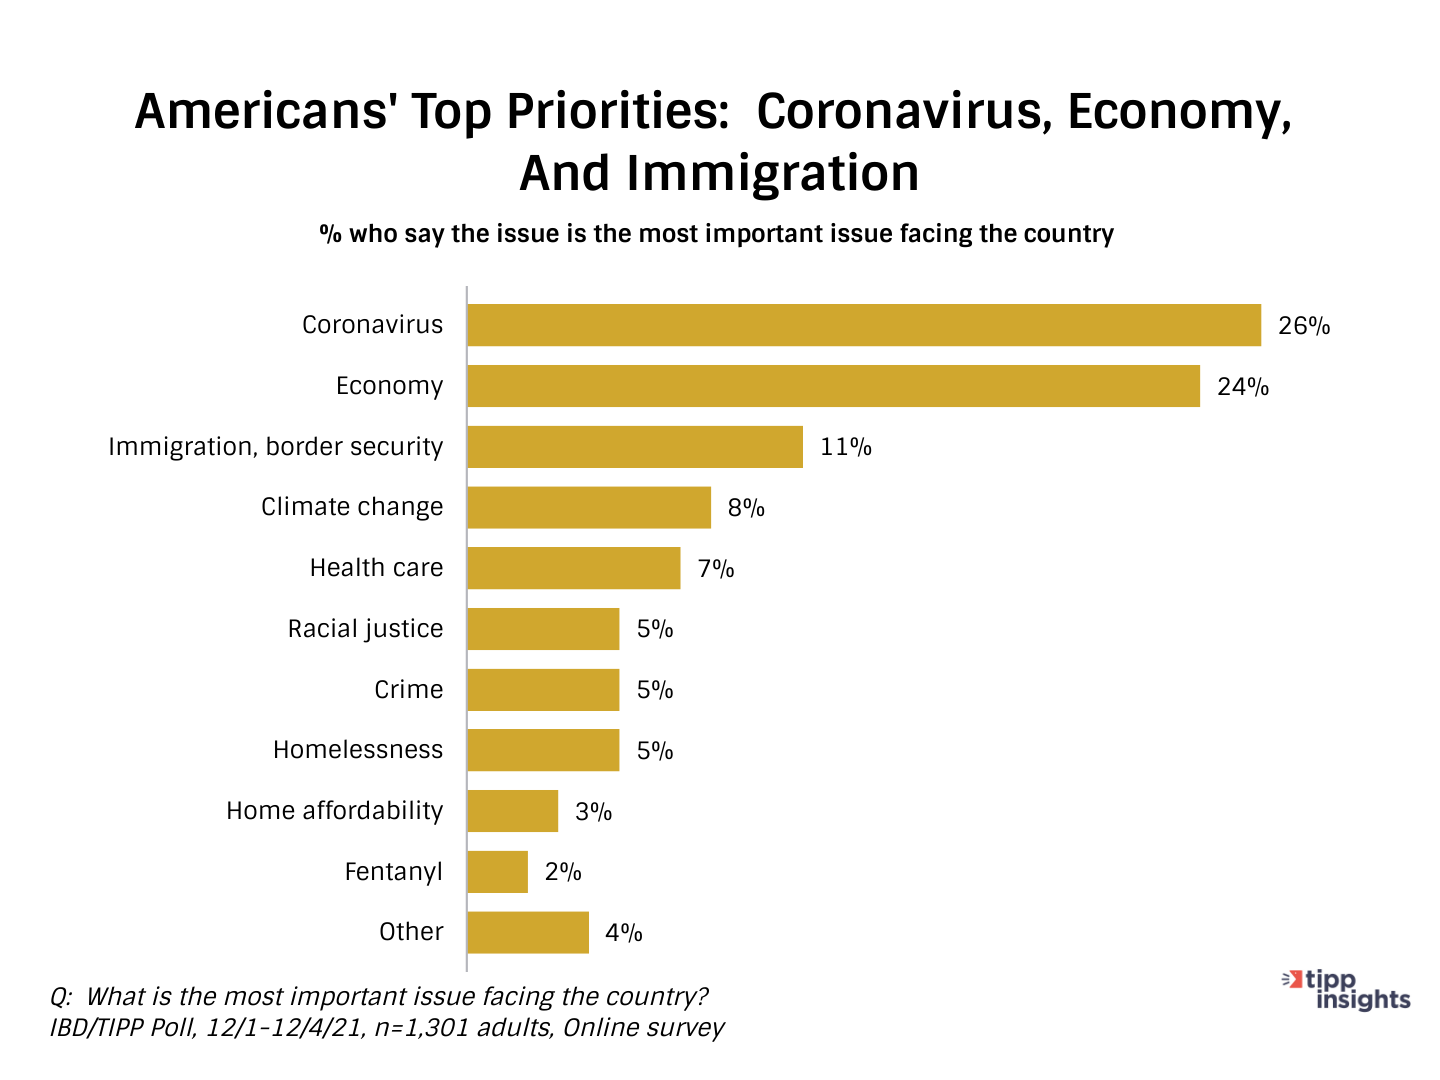 IBD/TIPP Poll Results: America's top priorities, COVID19, Economy, and Immigration